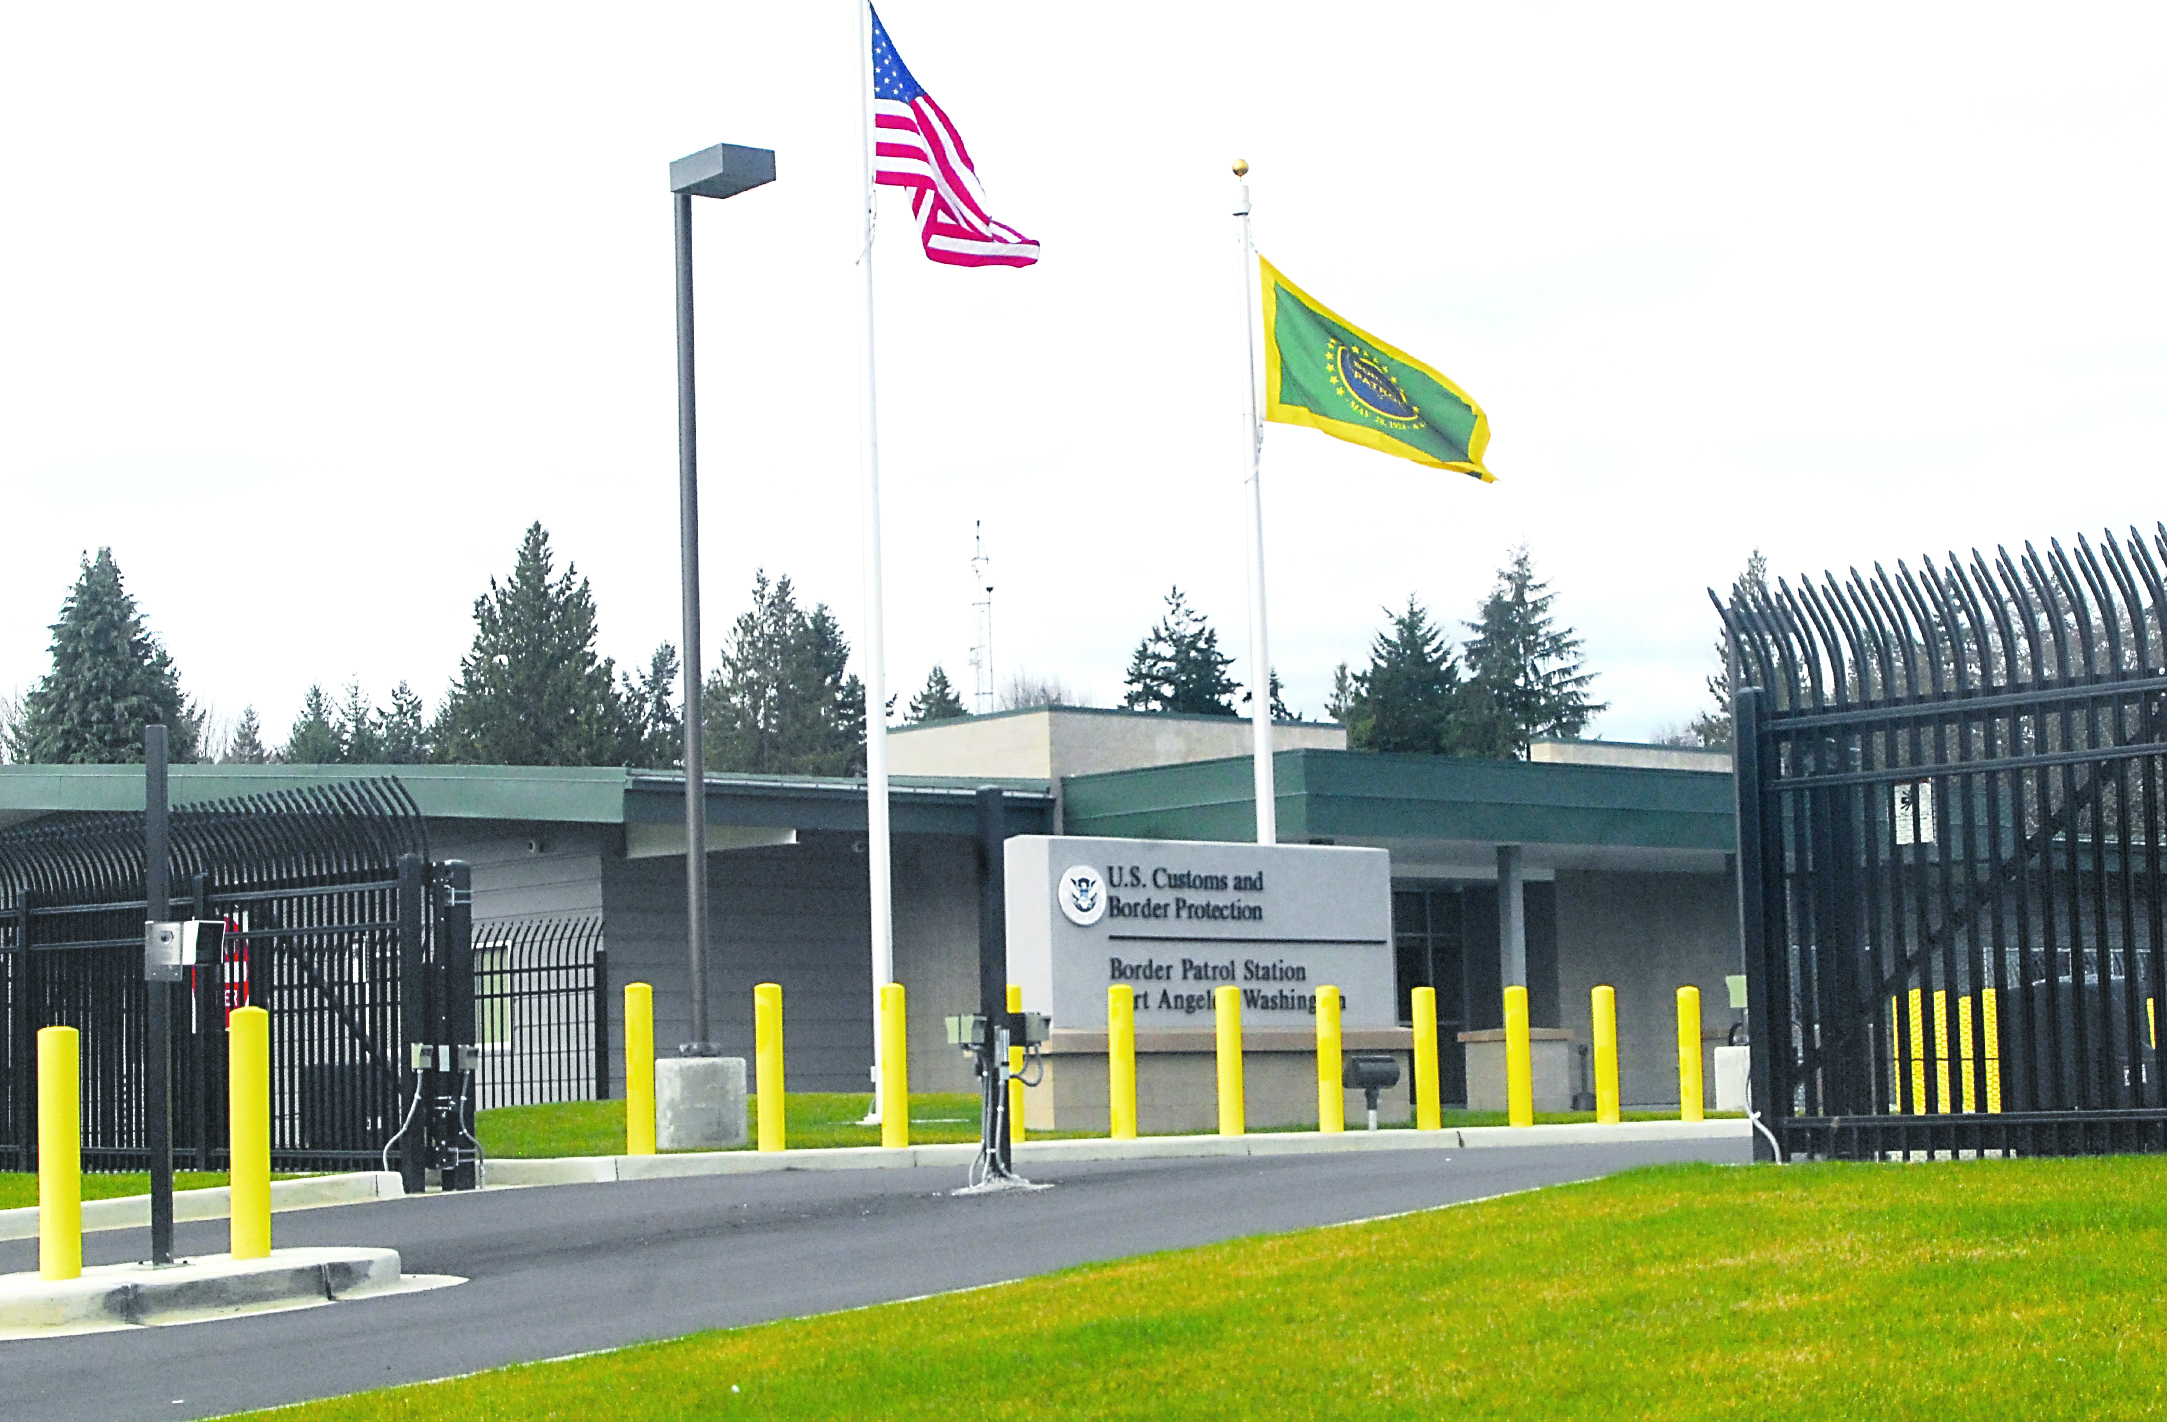 Port Angeles' is one of the U.S. Customs and Border Protection stations across the nation that will impose budget-cutting measures due to the recent sequester in Washington